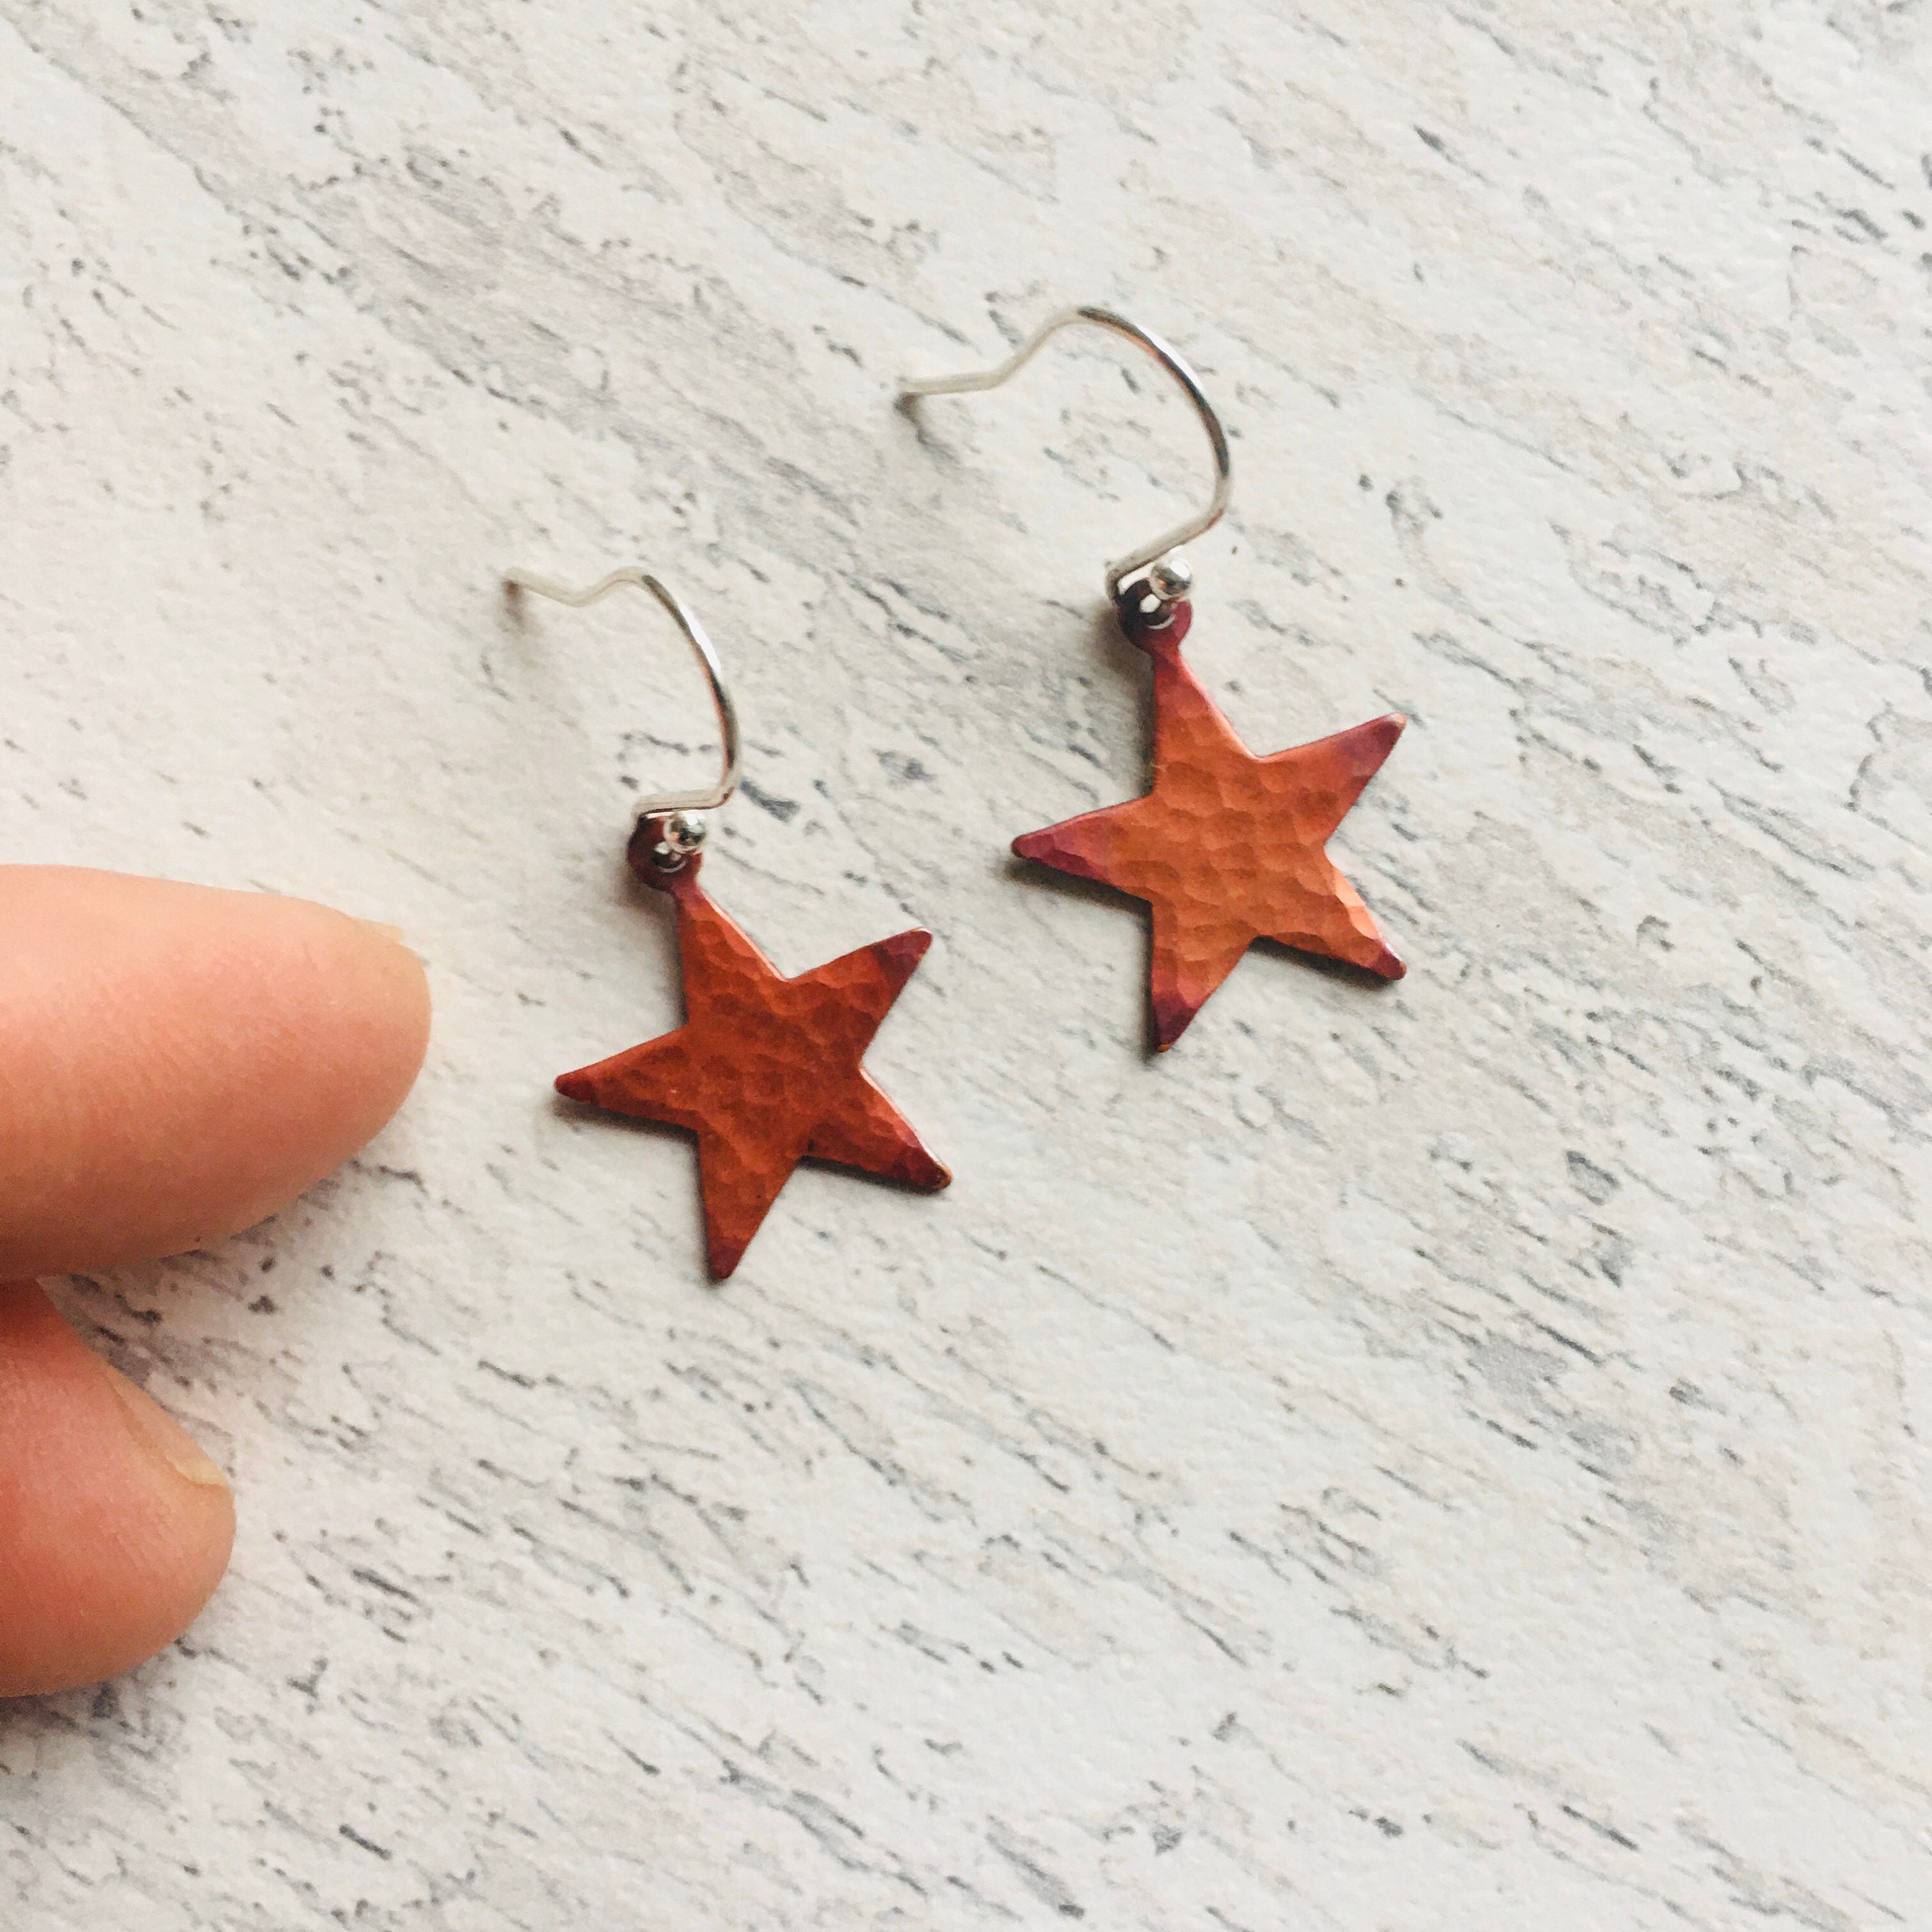 Star Earrings in red patinated copper, and, sterling silver ear findings.